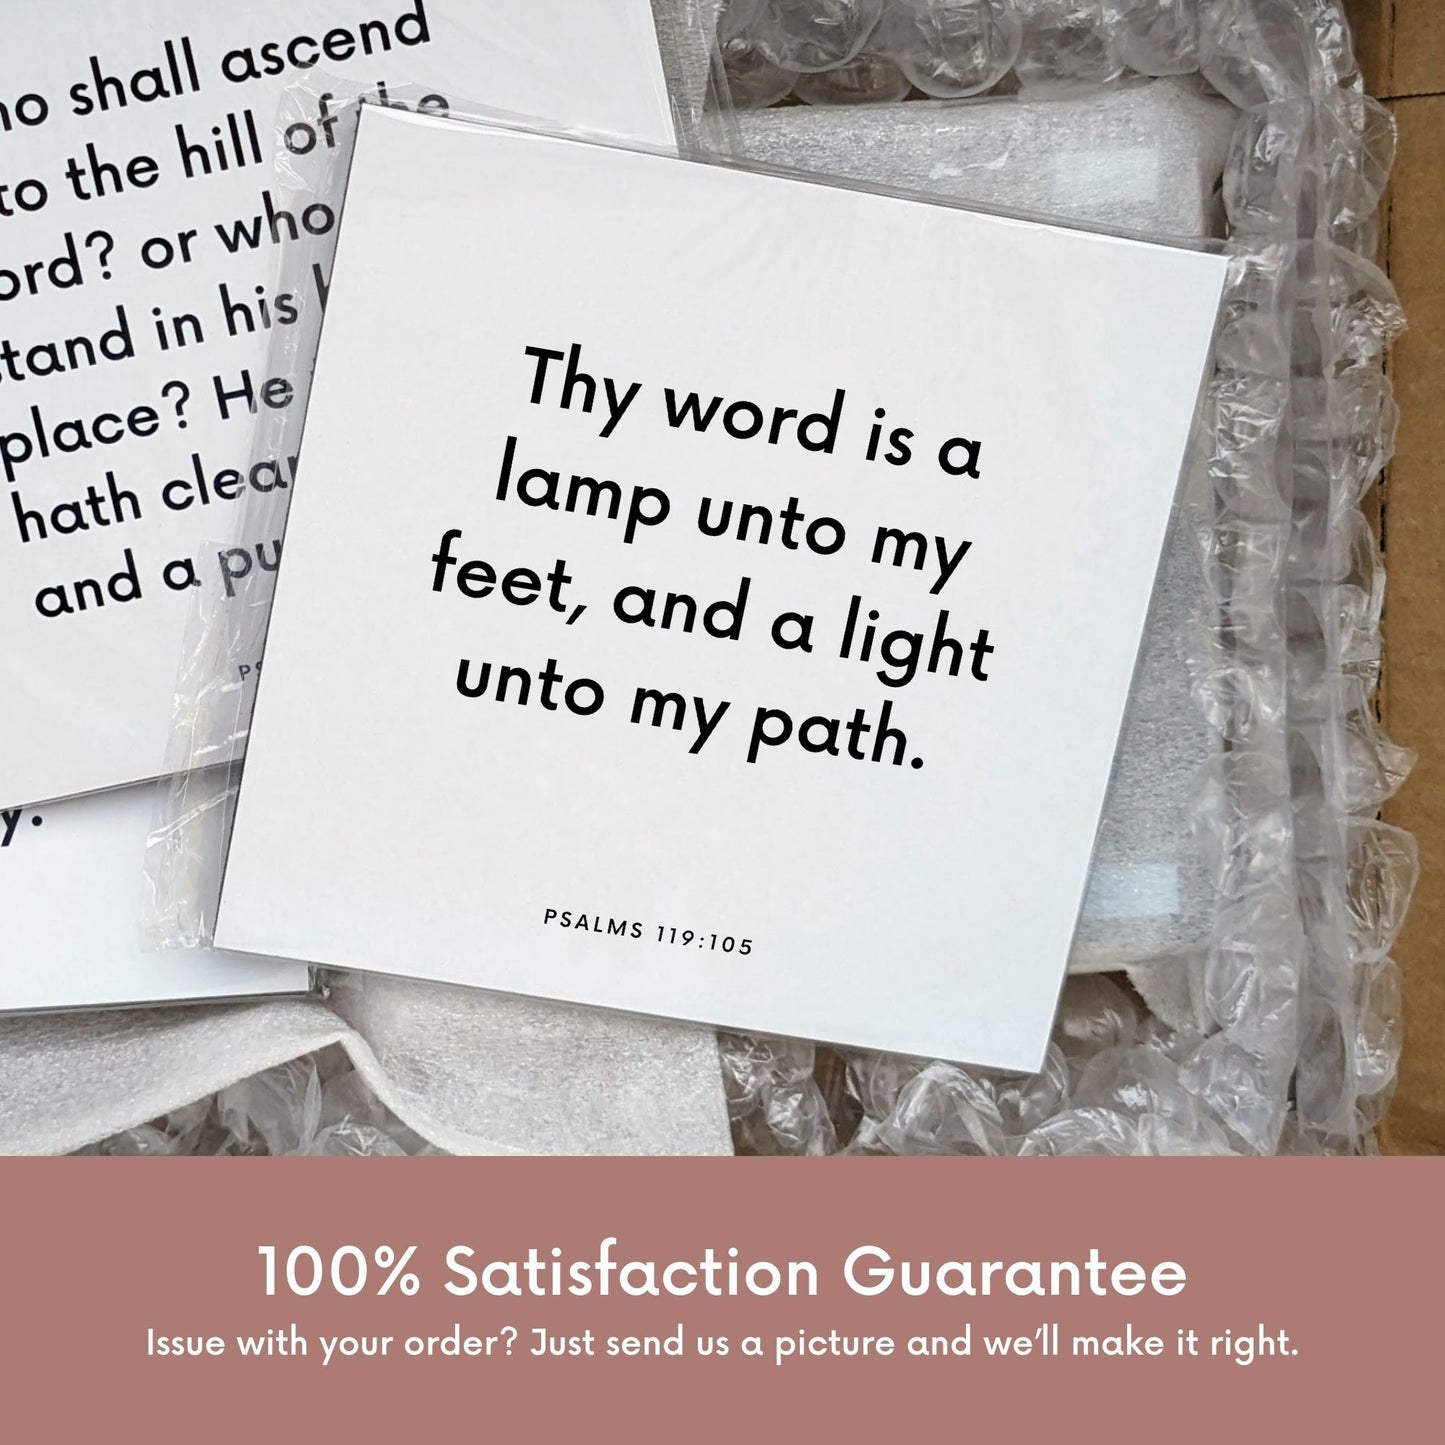 Shipping materials for scripture tile of Psalms 119:105 - "Thy word is a lamp unto my feet, and a light unto my path"